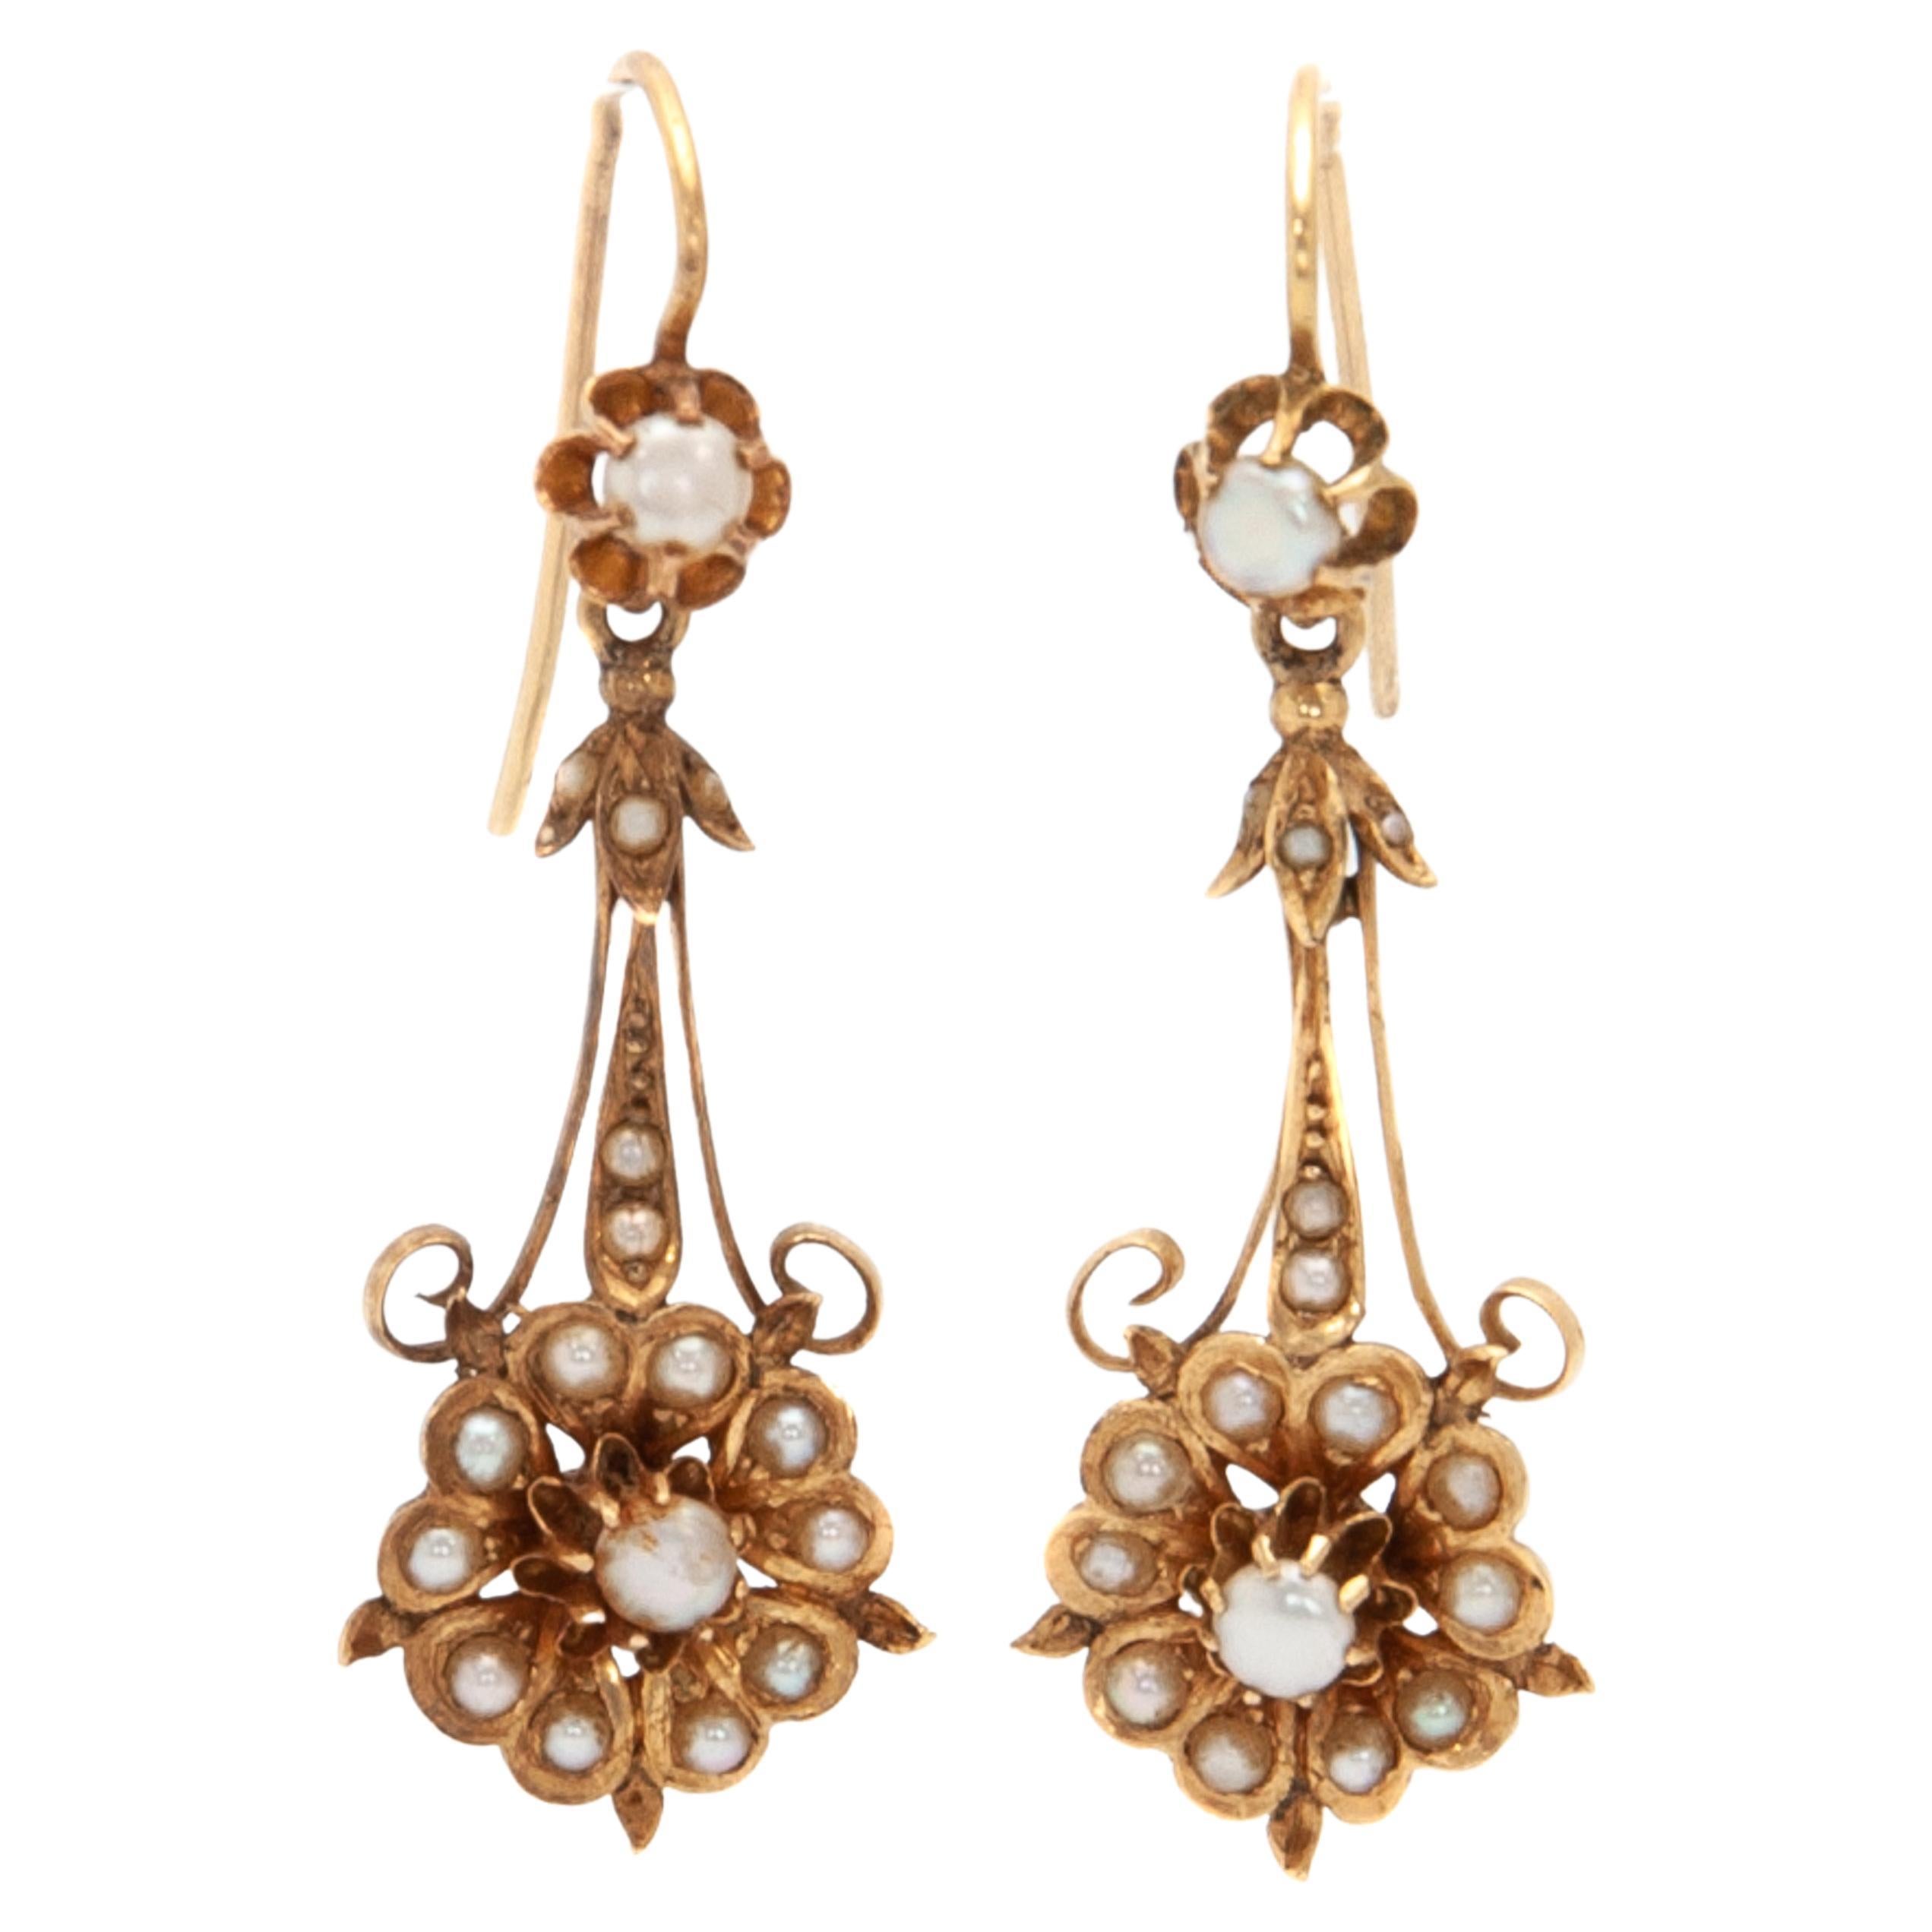 Antique 14K Gold Seed Pearl Floral Dangle Earrings 